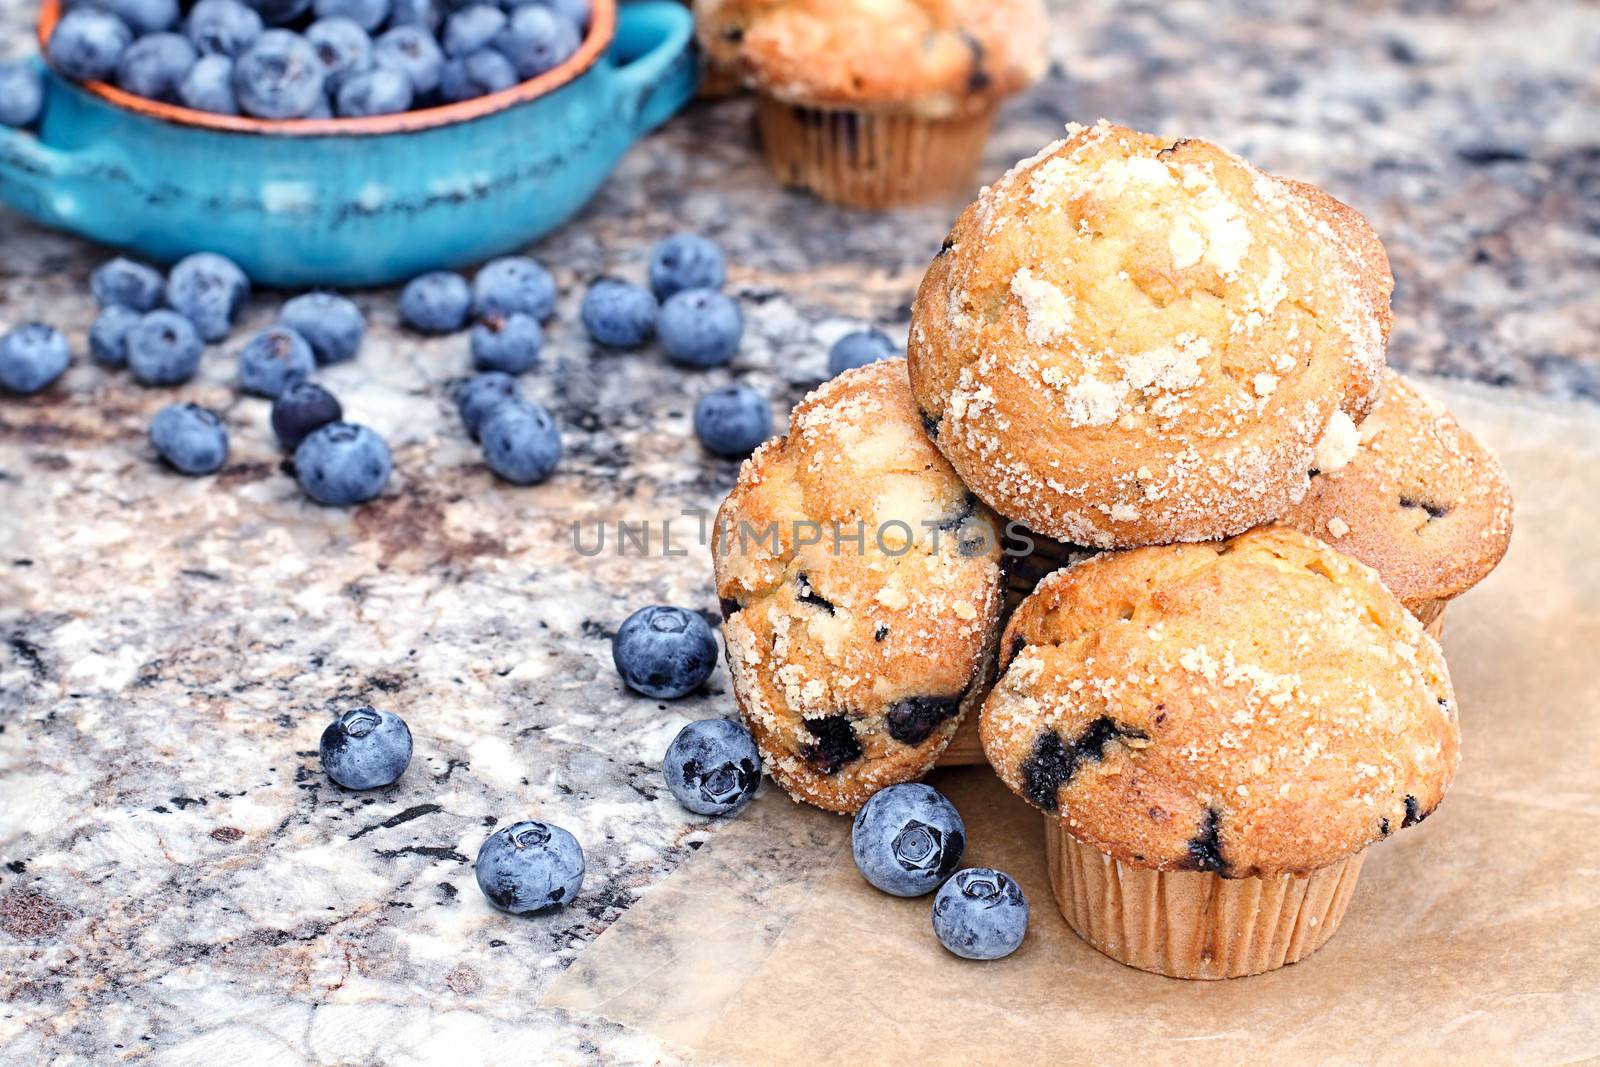 Delicious homemade blueberry muffins with fresh blueberries spilling around them.